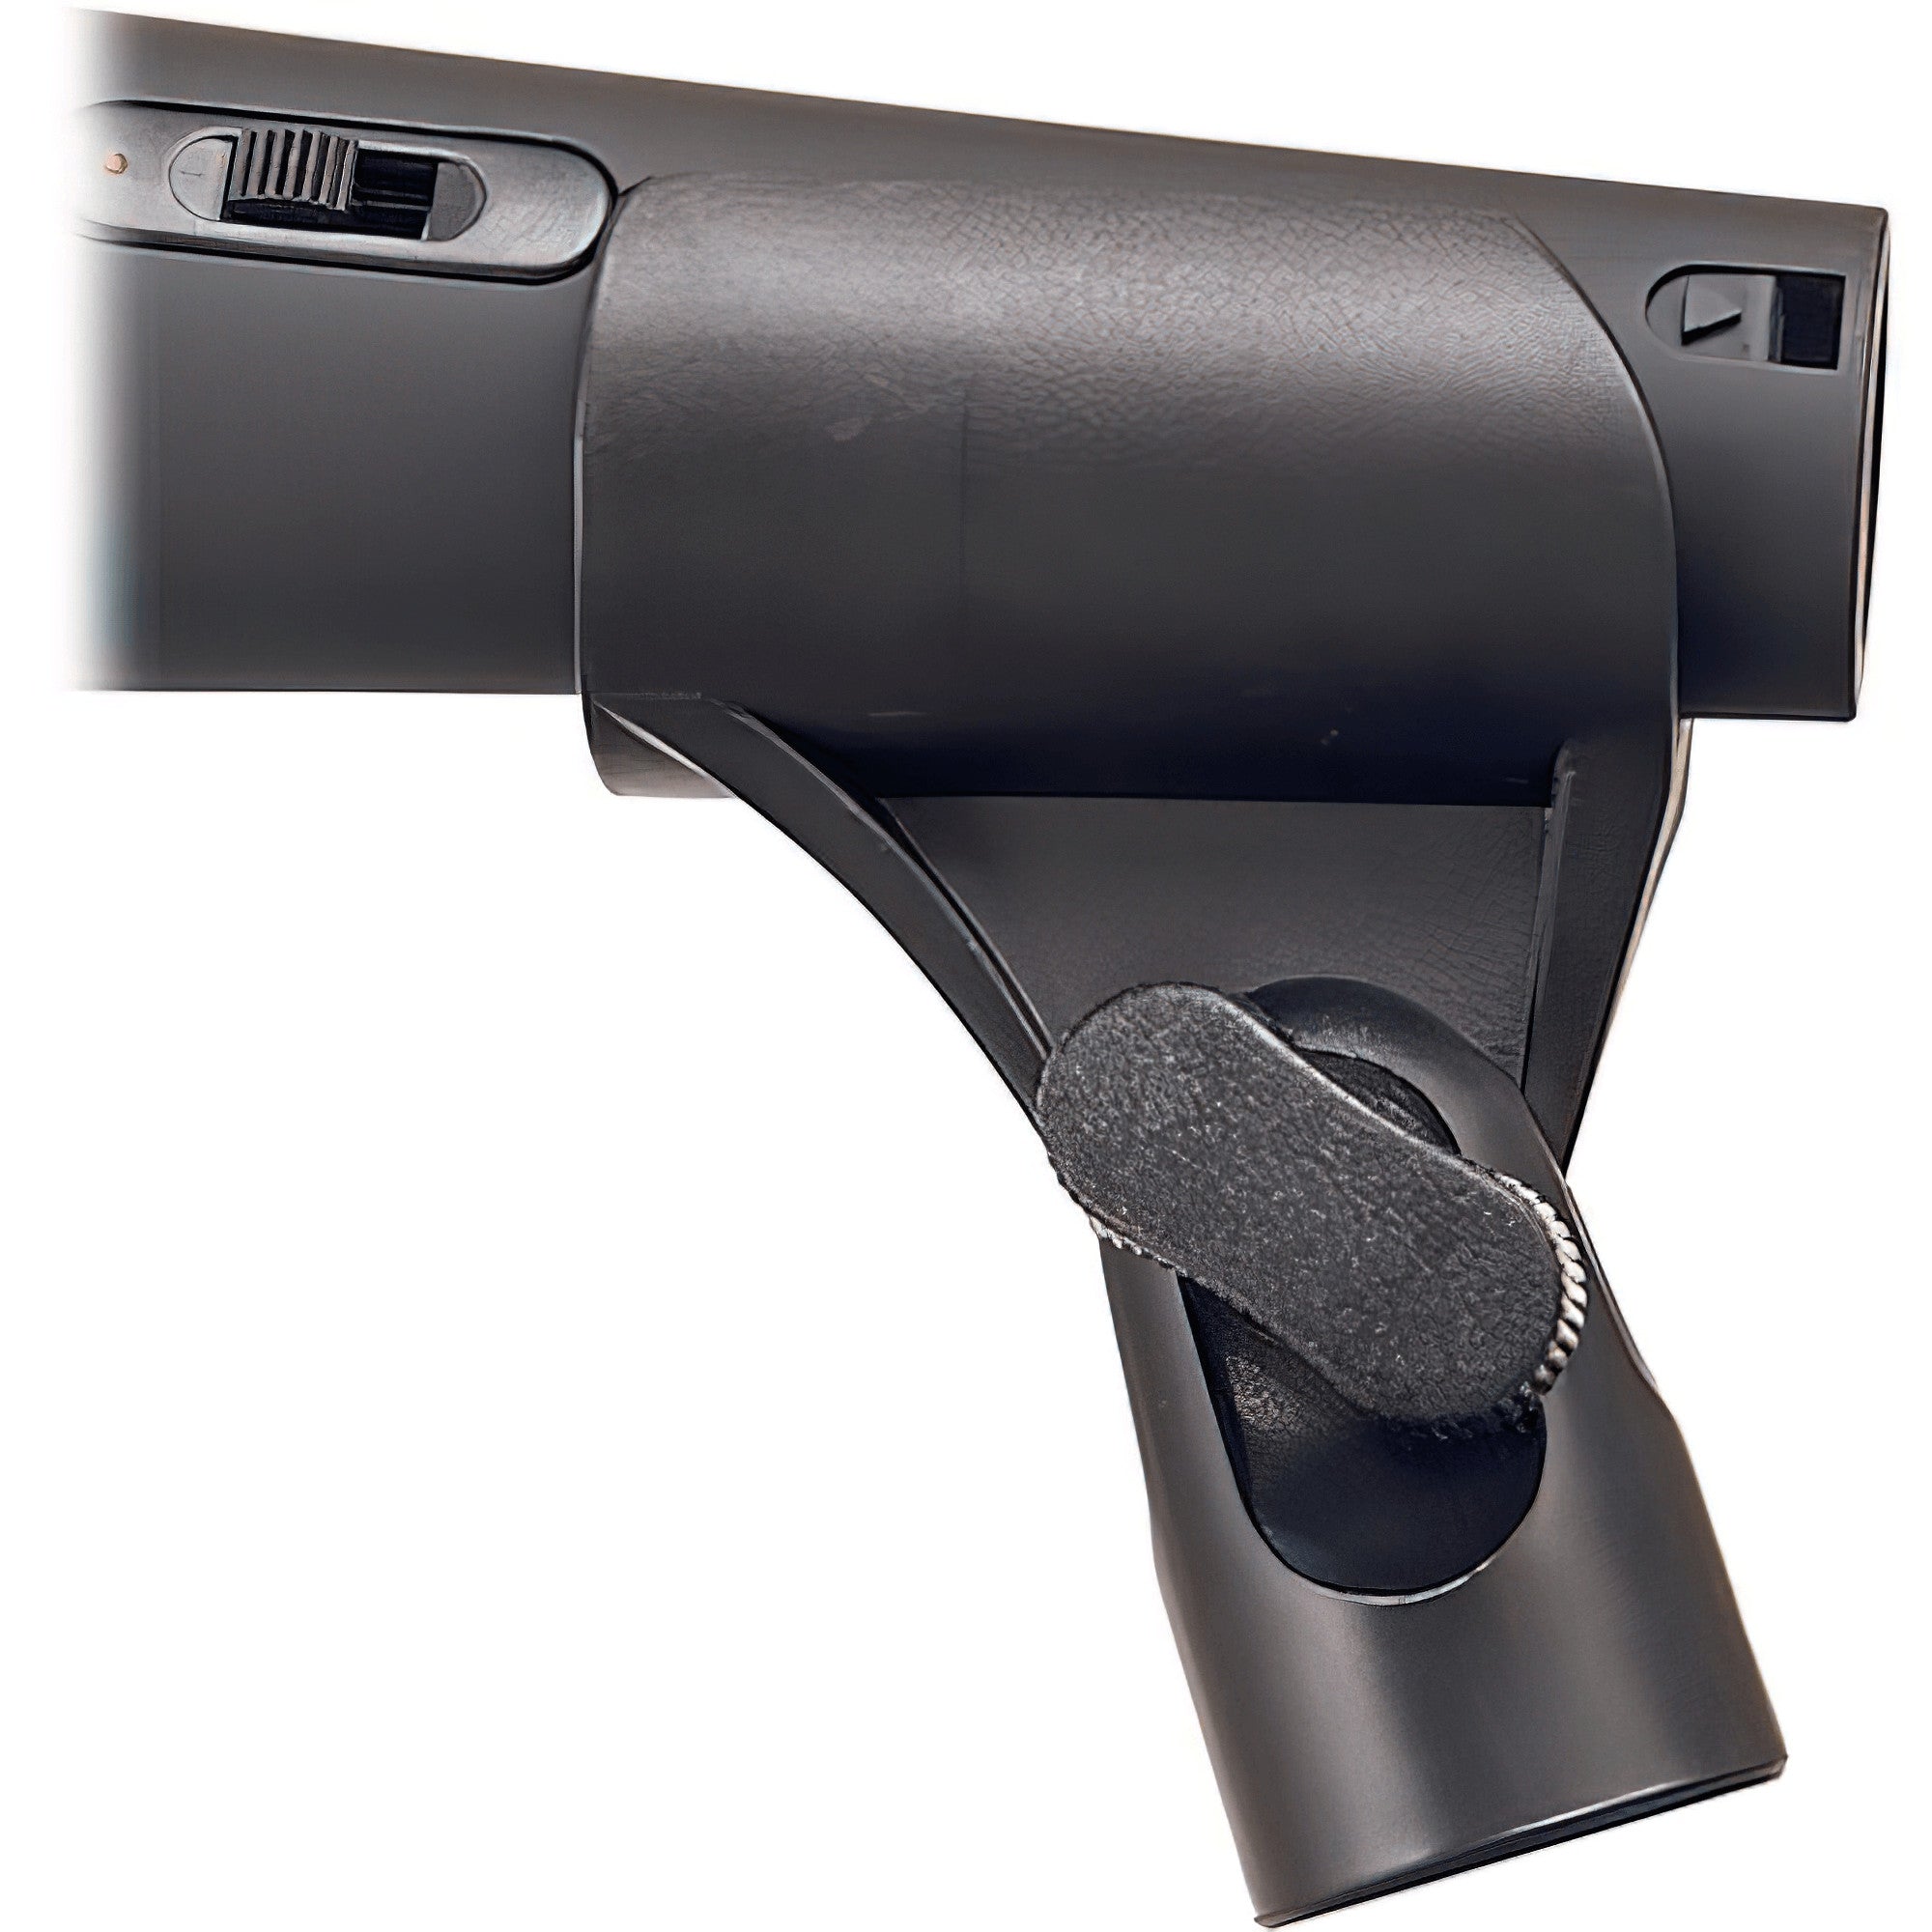 Astatic, Astatic 40-343 Snap-in Adjustable Stand Clip for All Handheld Microphones